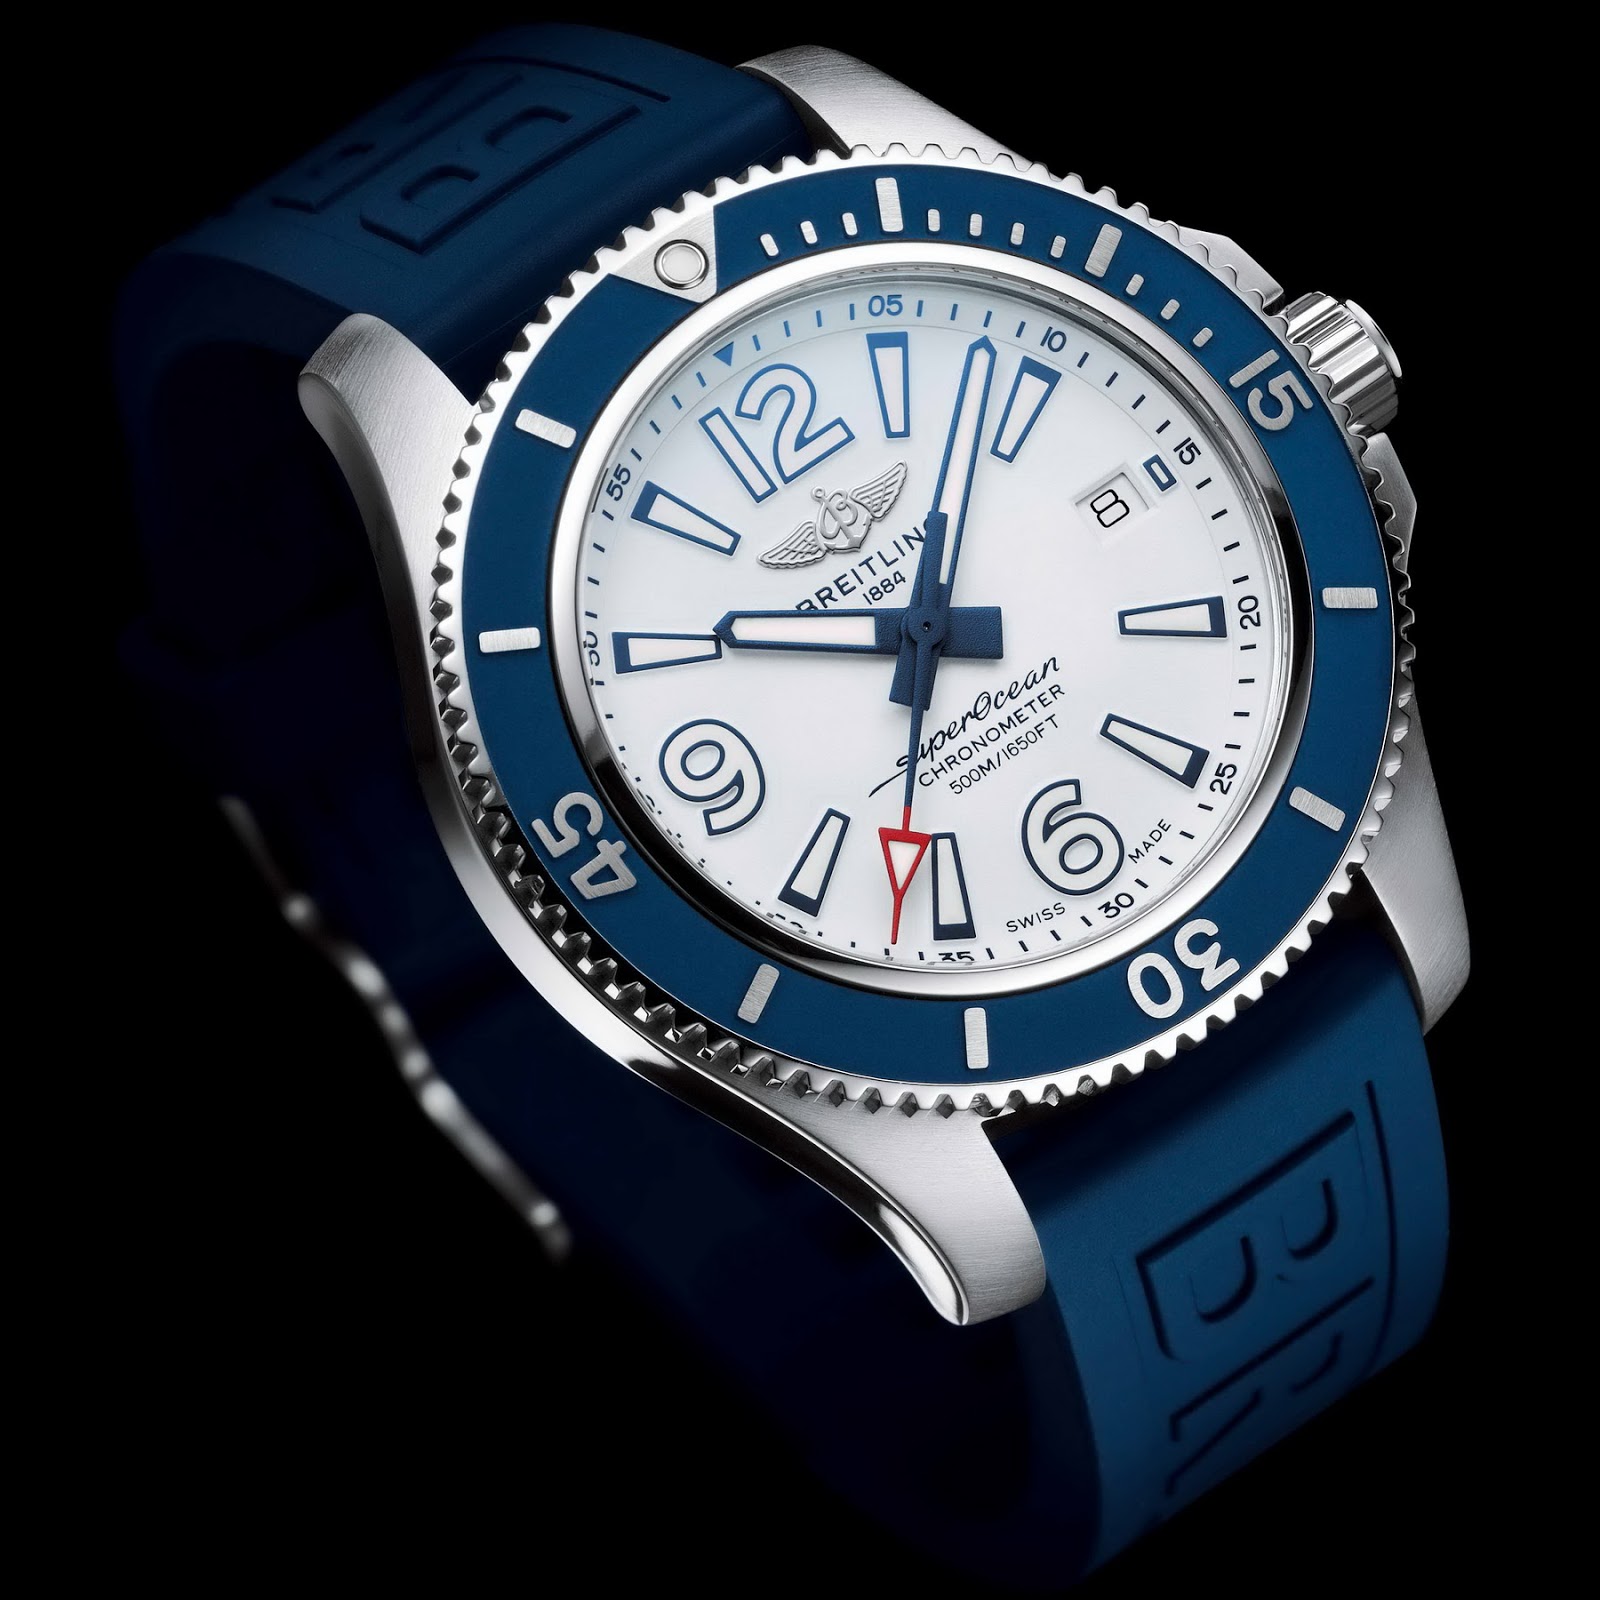 Breitling's newest from Baselworld 2019 BREITLING%2BSuperocean%2B42%2B01